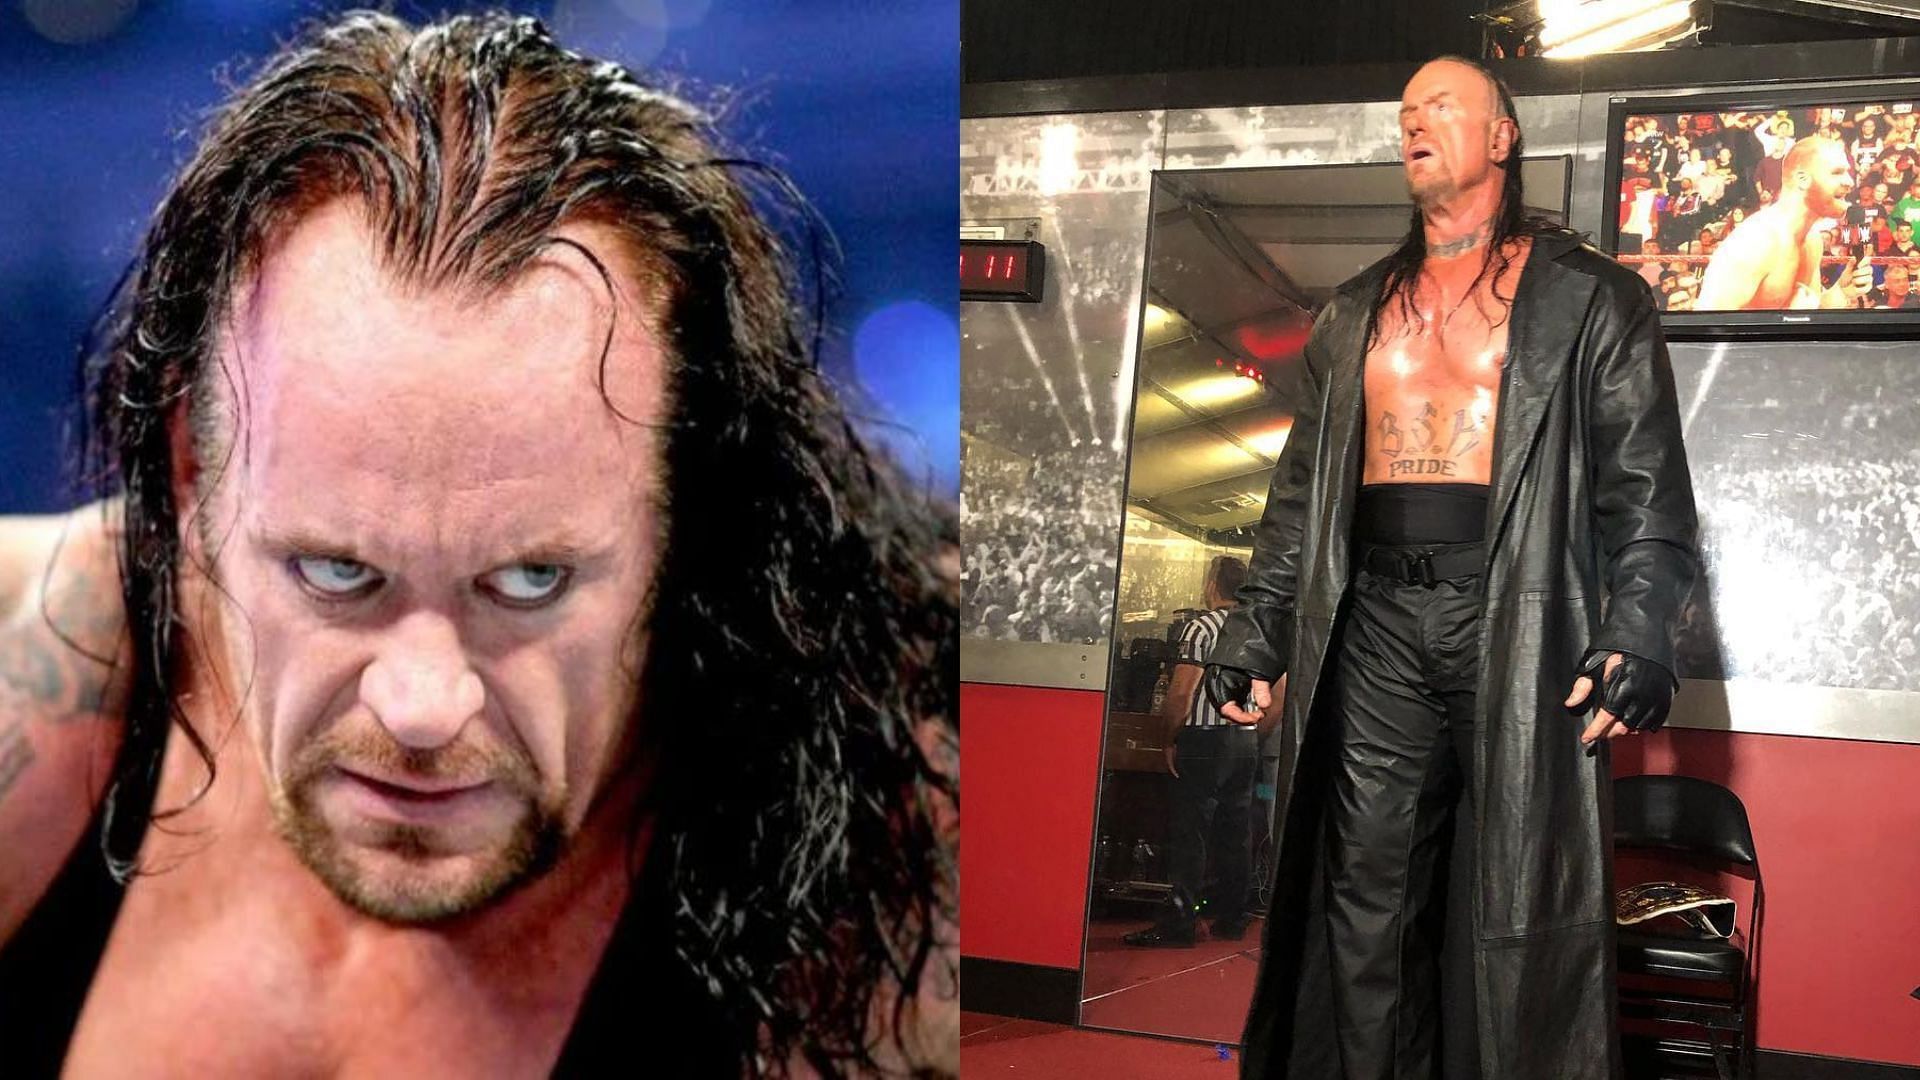 The Undertaker is currently inducted into the WWE Hall of Fame